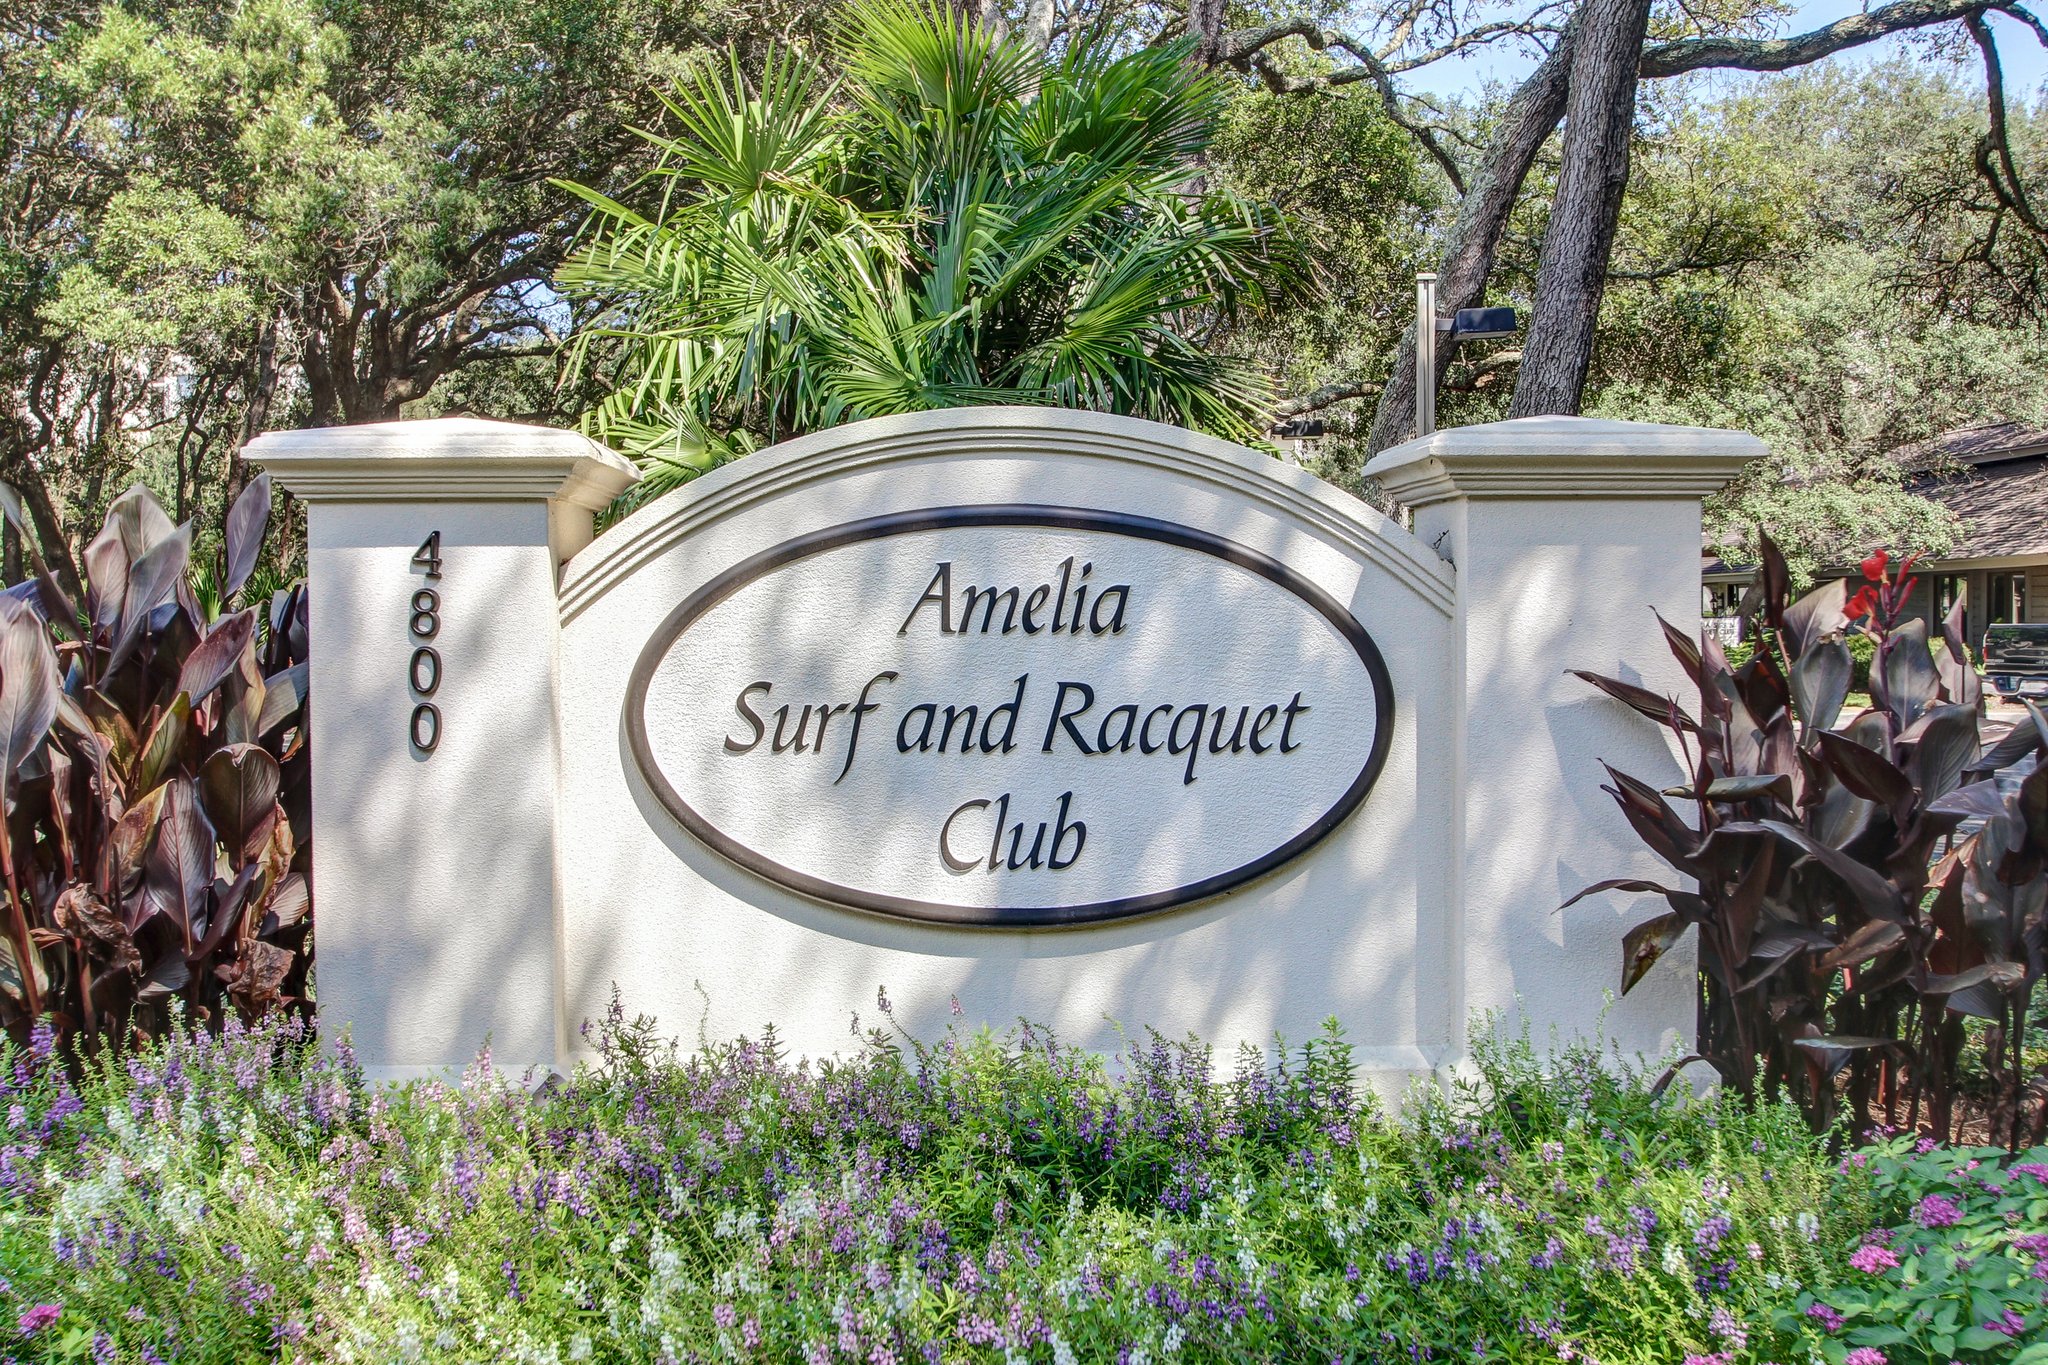 Welcome to Amelia Surf and Racquet Club